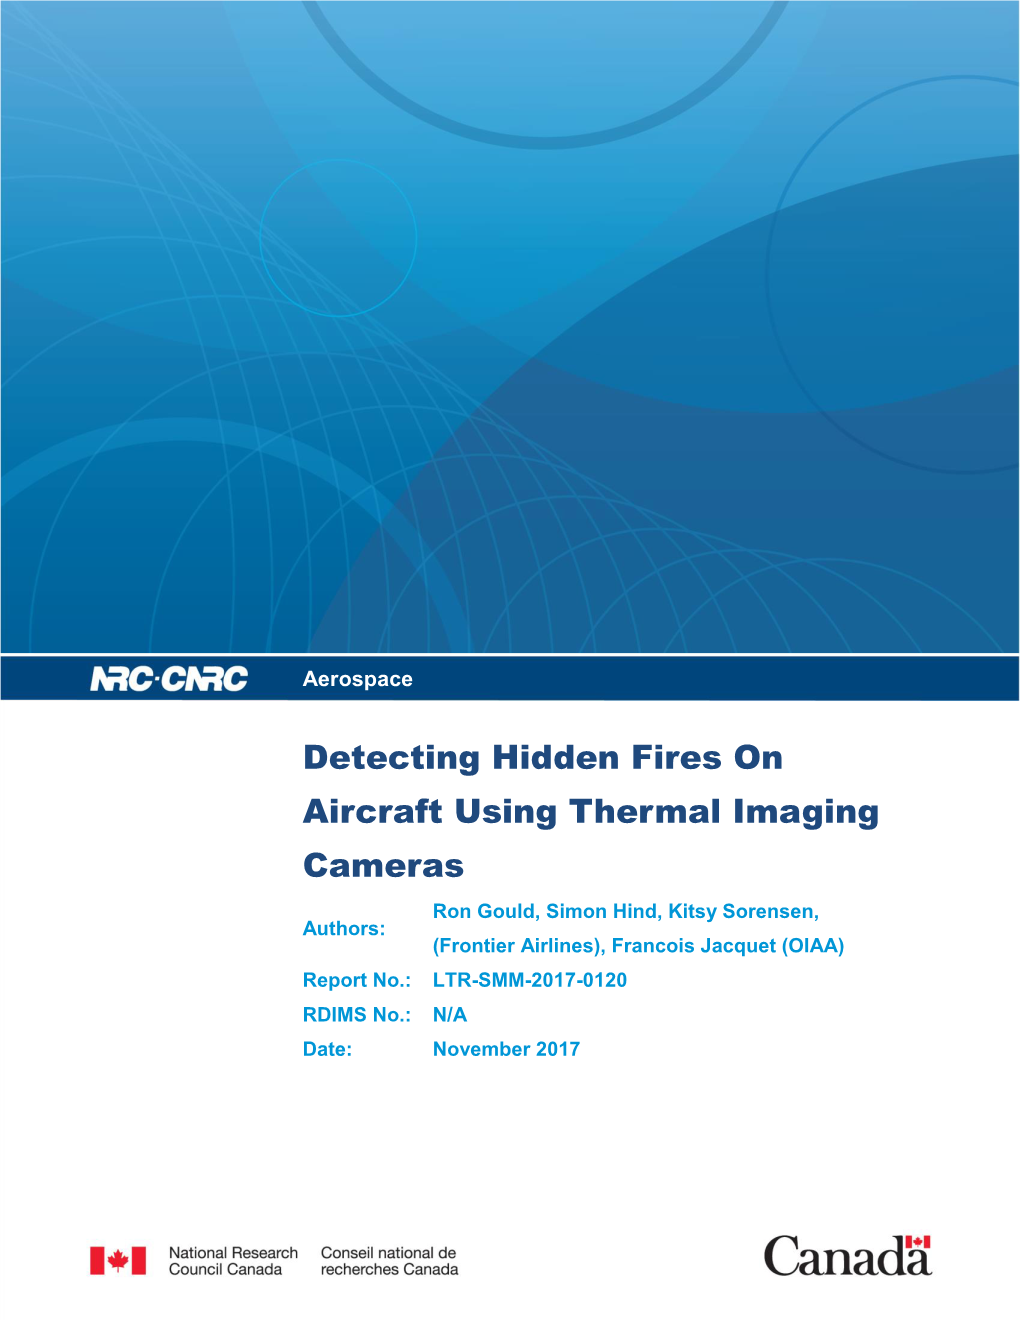 Detecting Hidden Fires on Aircraft Using Thermal Imaging Cameras